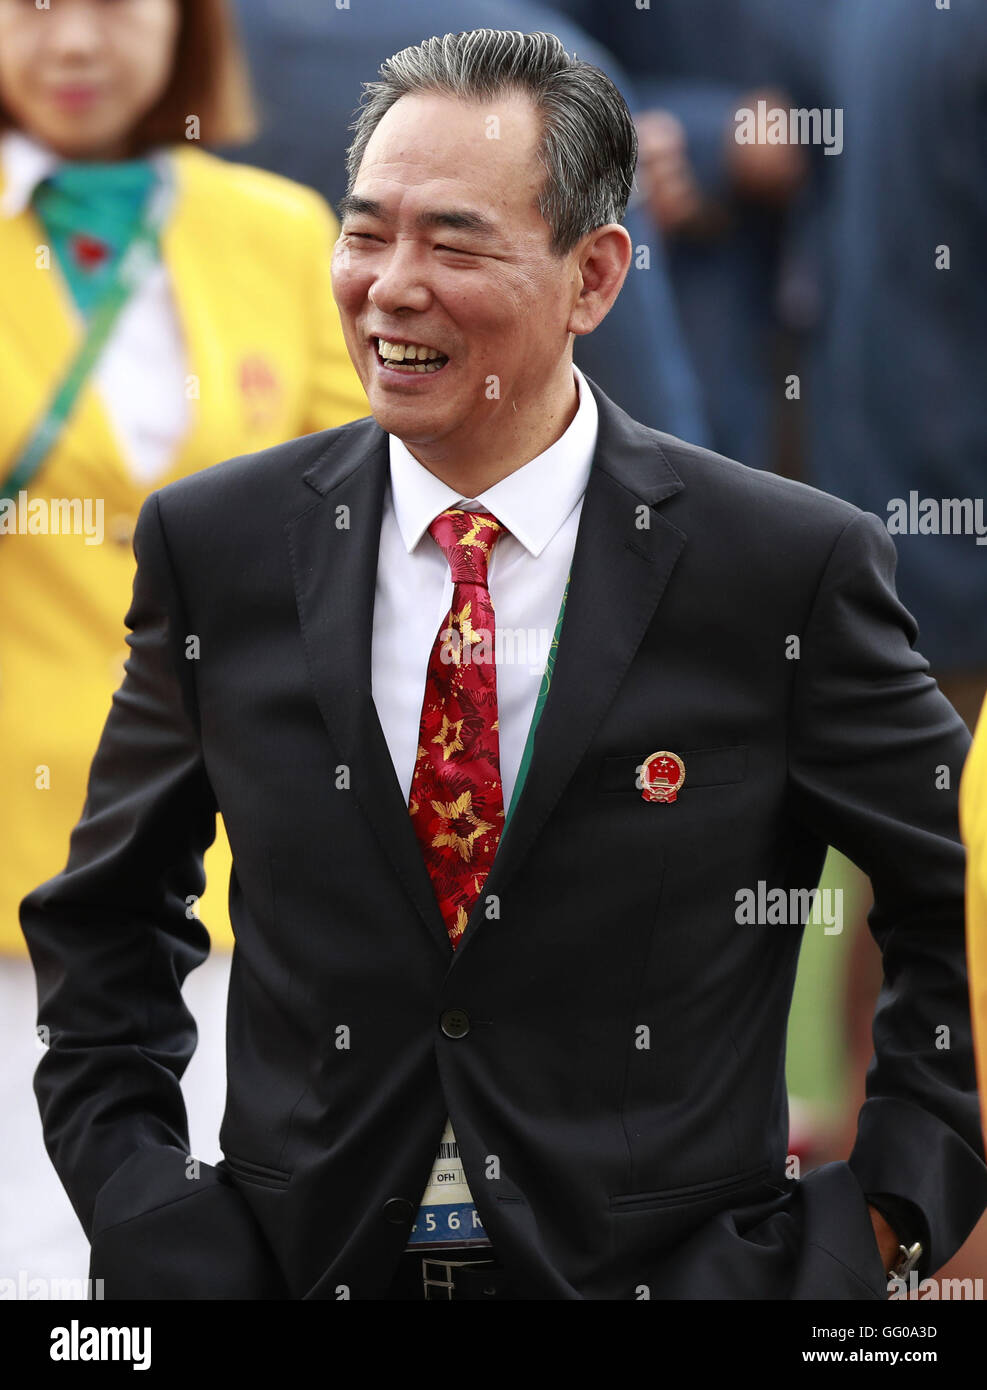 Rio De Janeiro, Brazil. 3rd Aug, 2016. Deputy chef de mission of Chinese delegation Cai Zhenhua attends the flag-raising ceremony at the Olympic Village in Rio de Janeiro, Brazil, on Aug. 3, 2016. Credit:  Ren Zhenglai/Xinhua/Alamy Live News Stock Photo